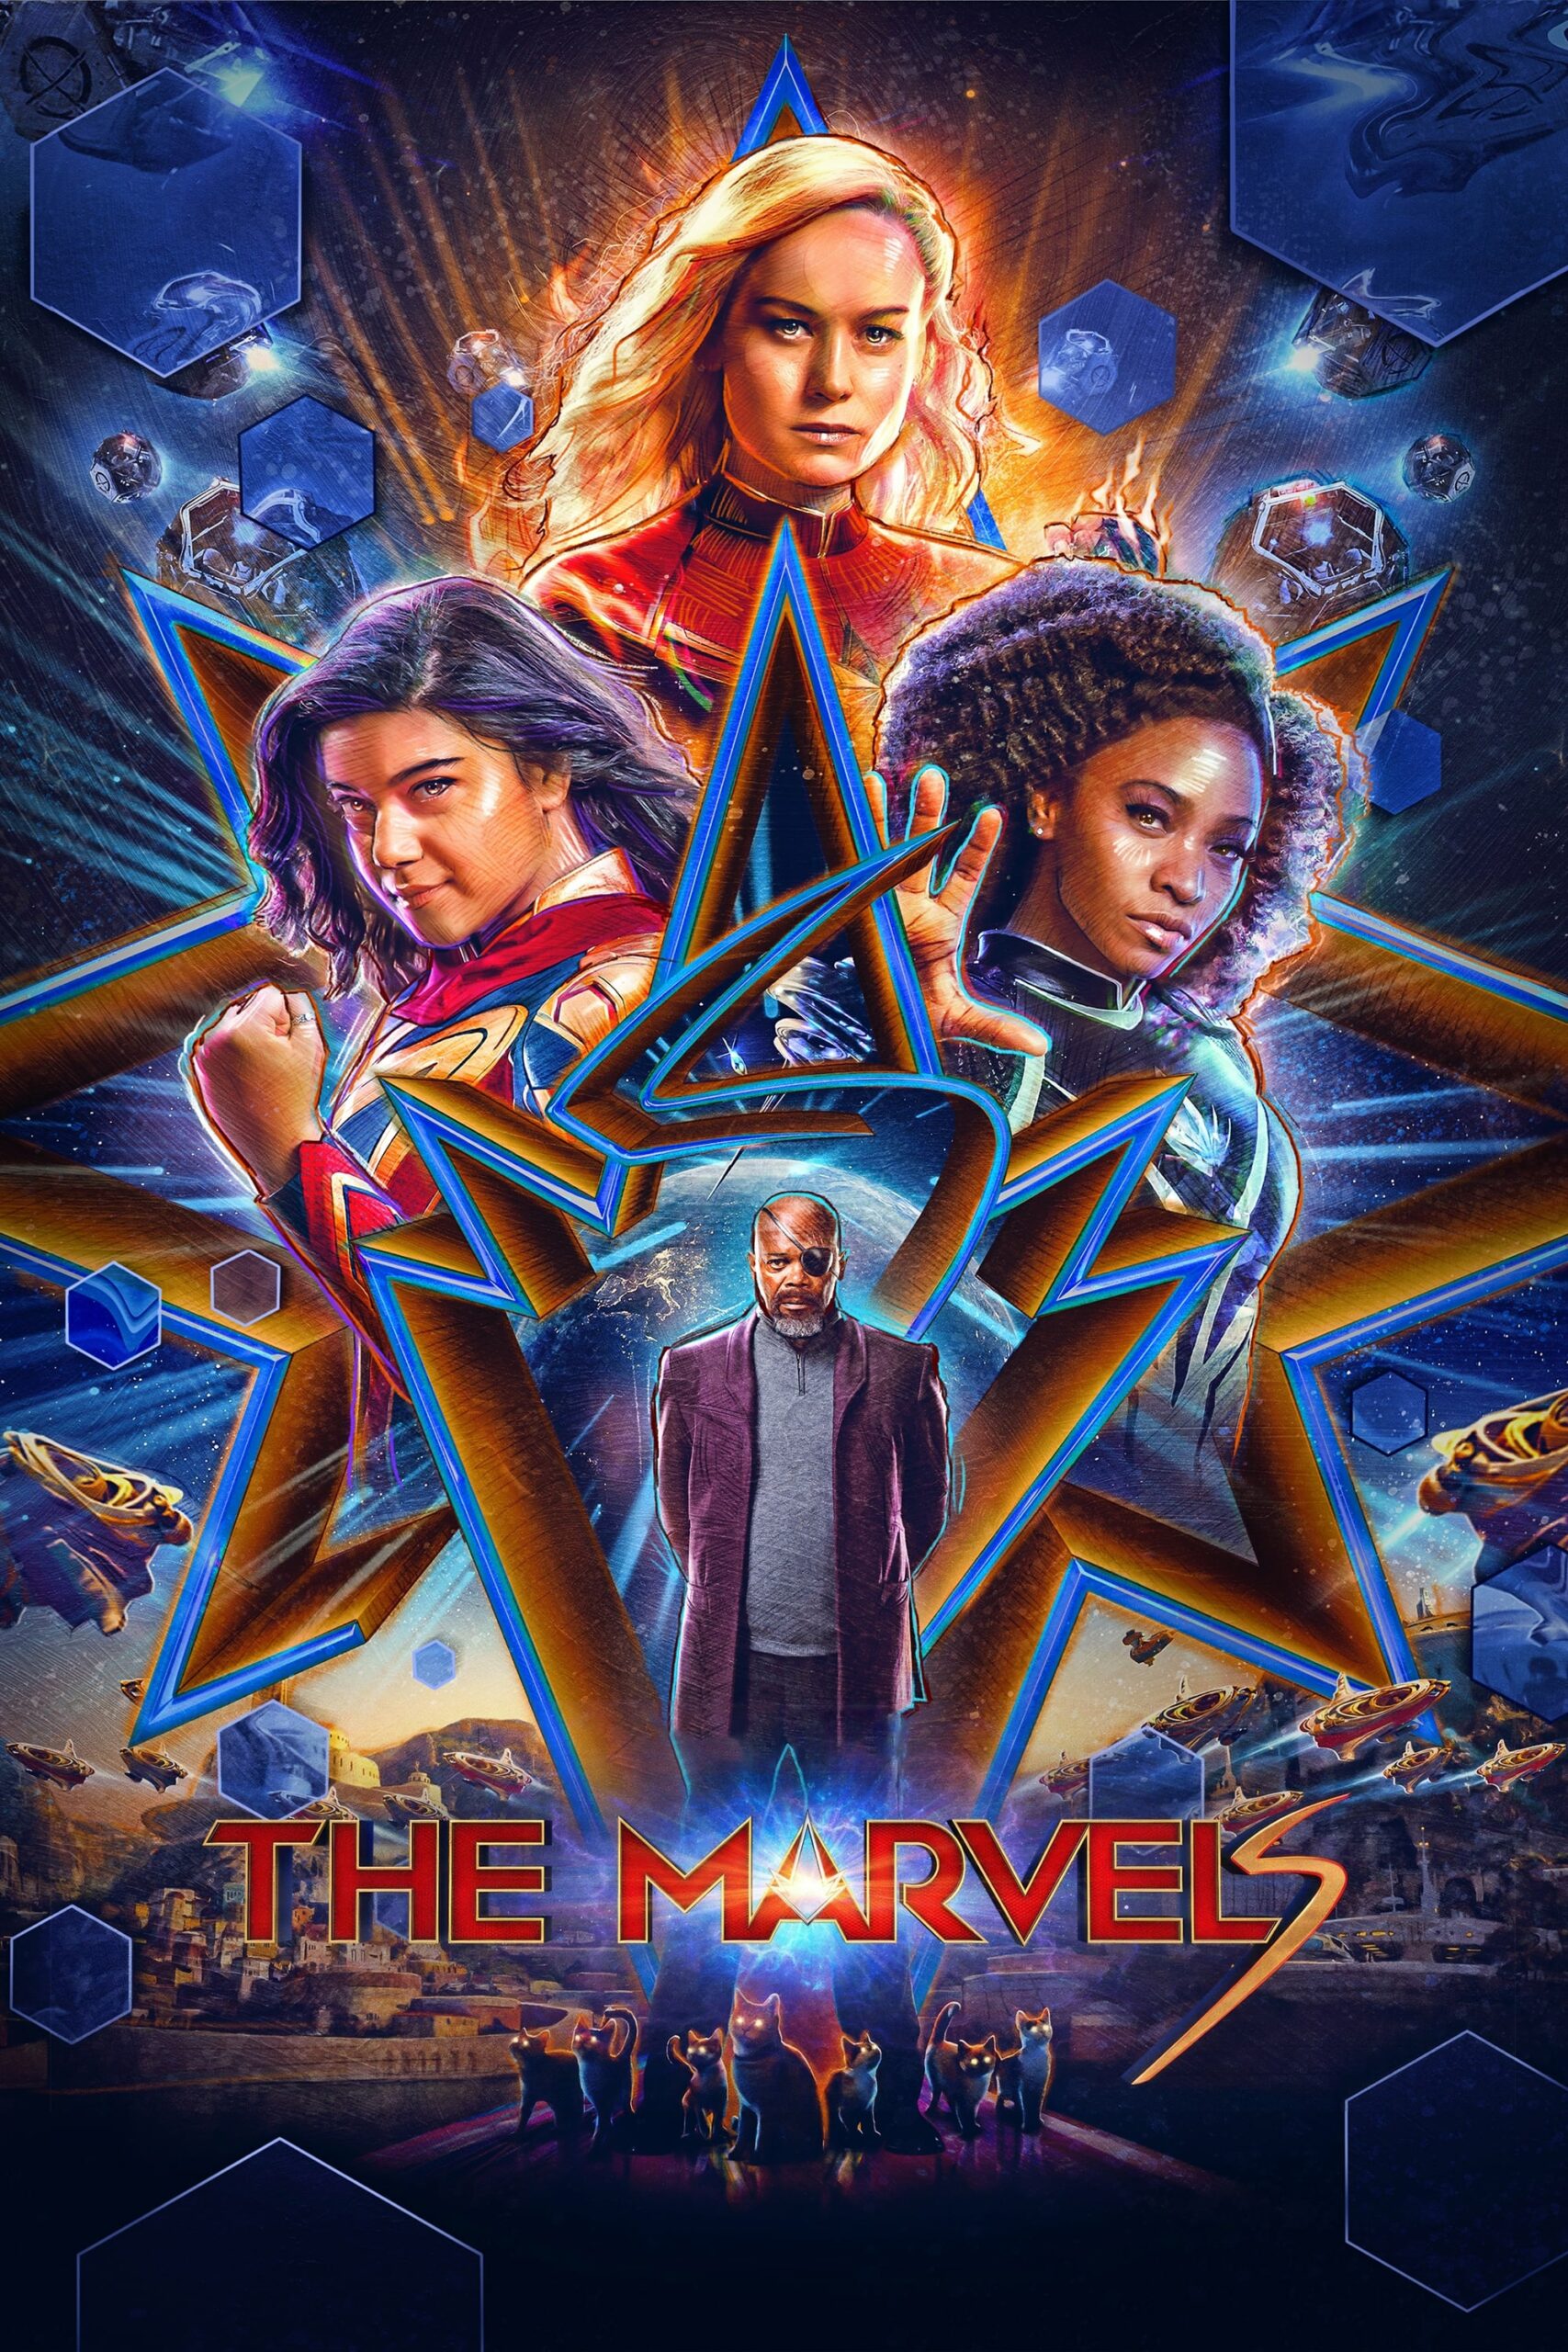 Poster for the movie "The Marvels"